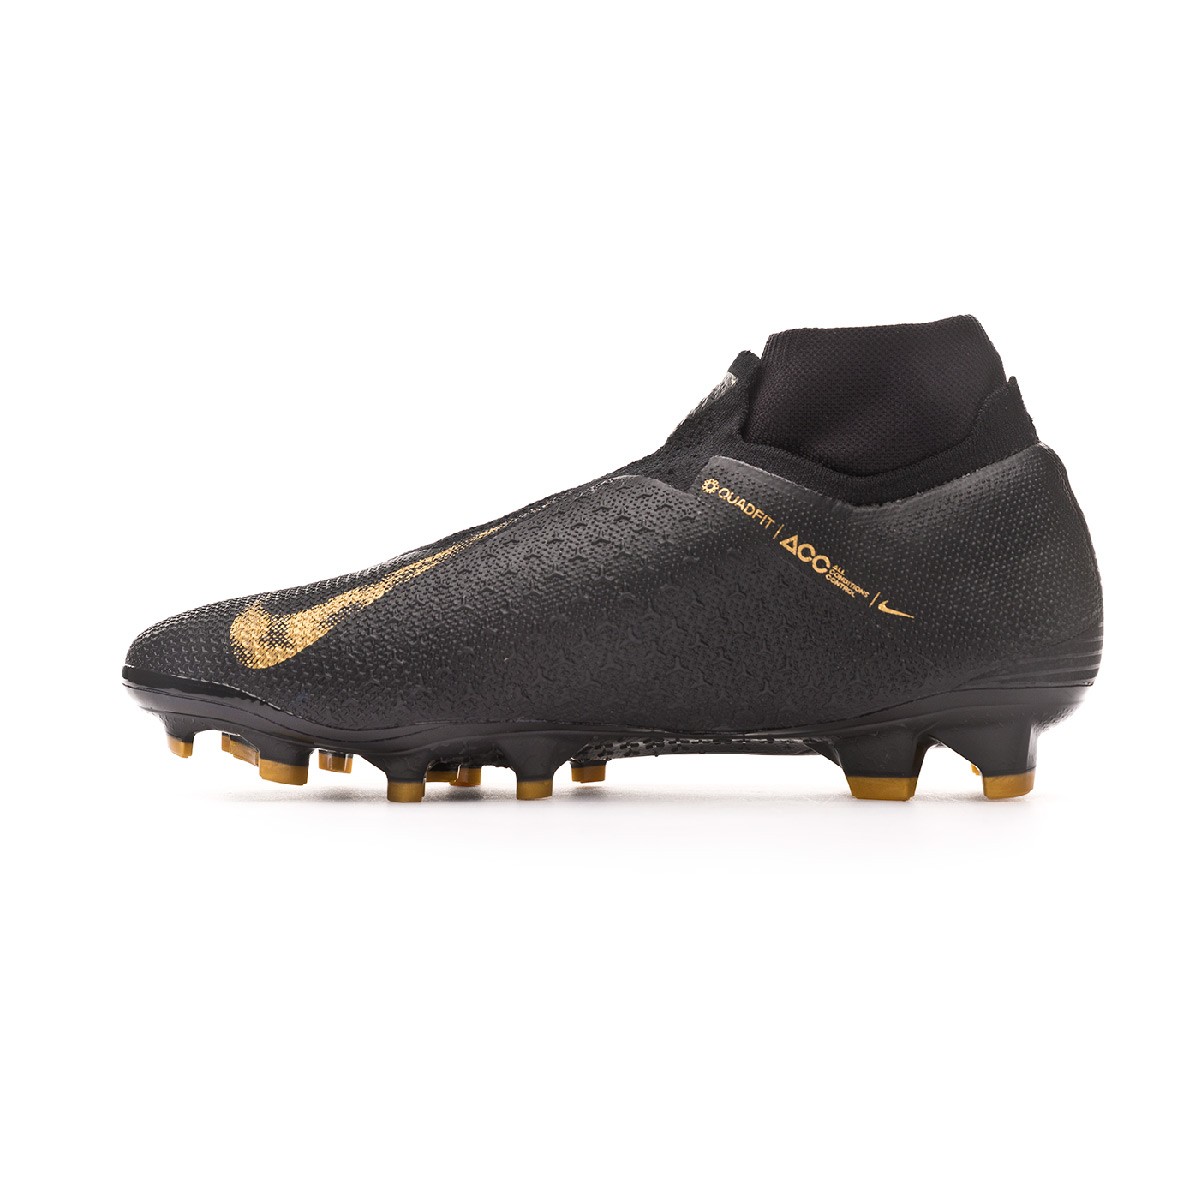 black and gold phantom boots